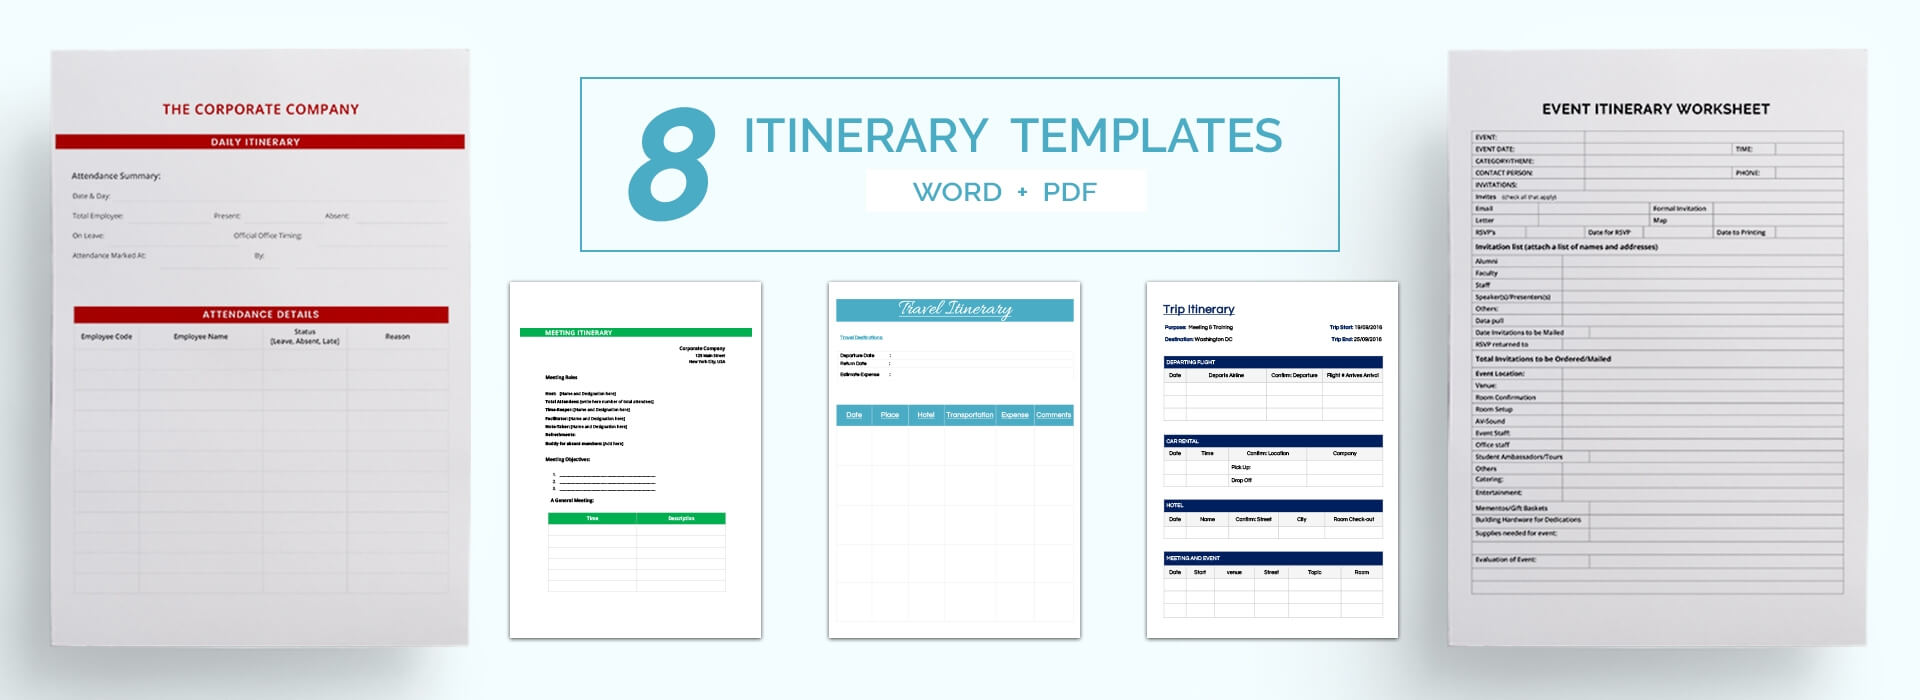 16+ Free Itinerary Templates – Travel, Wedding, Vacation Inside Blank Trip Itinerary Template